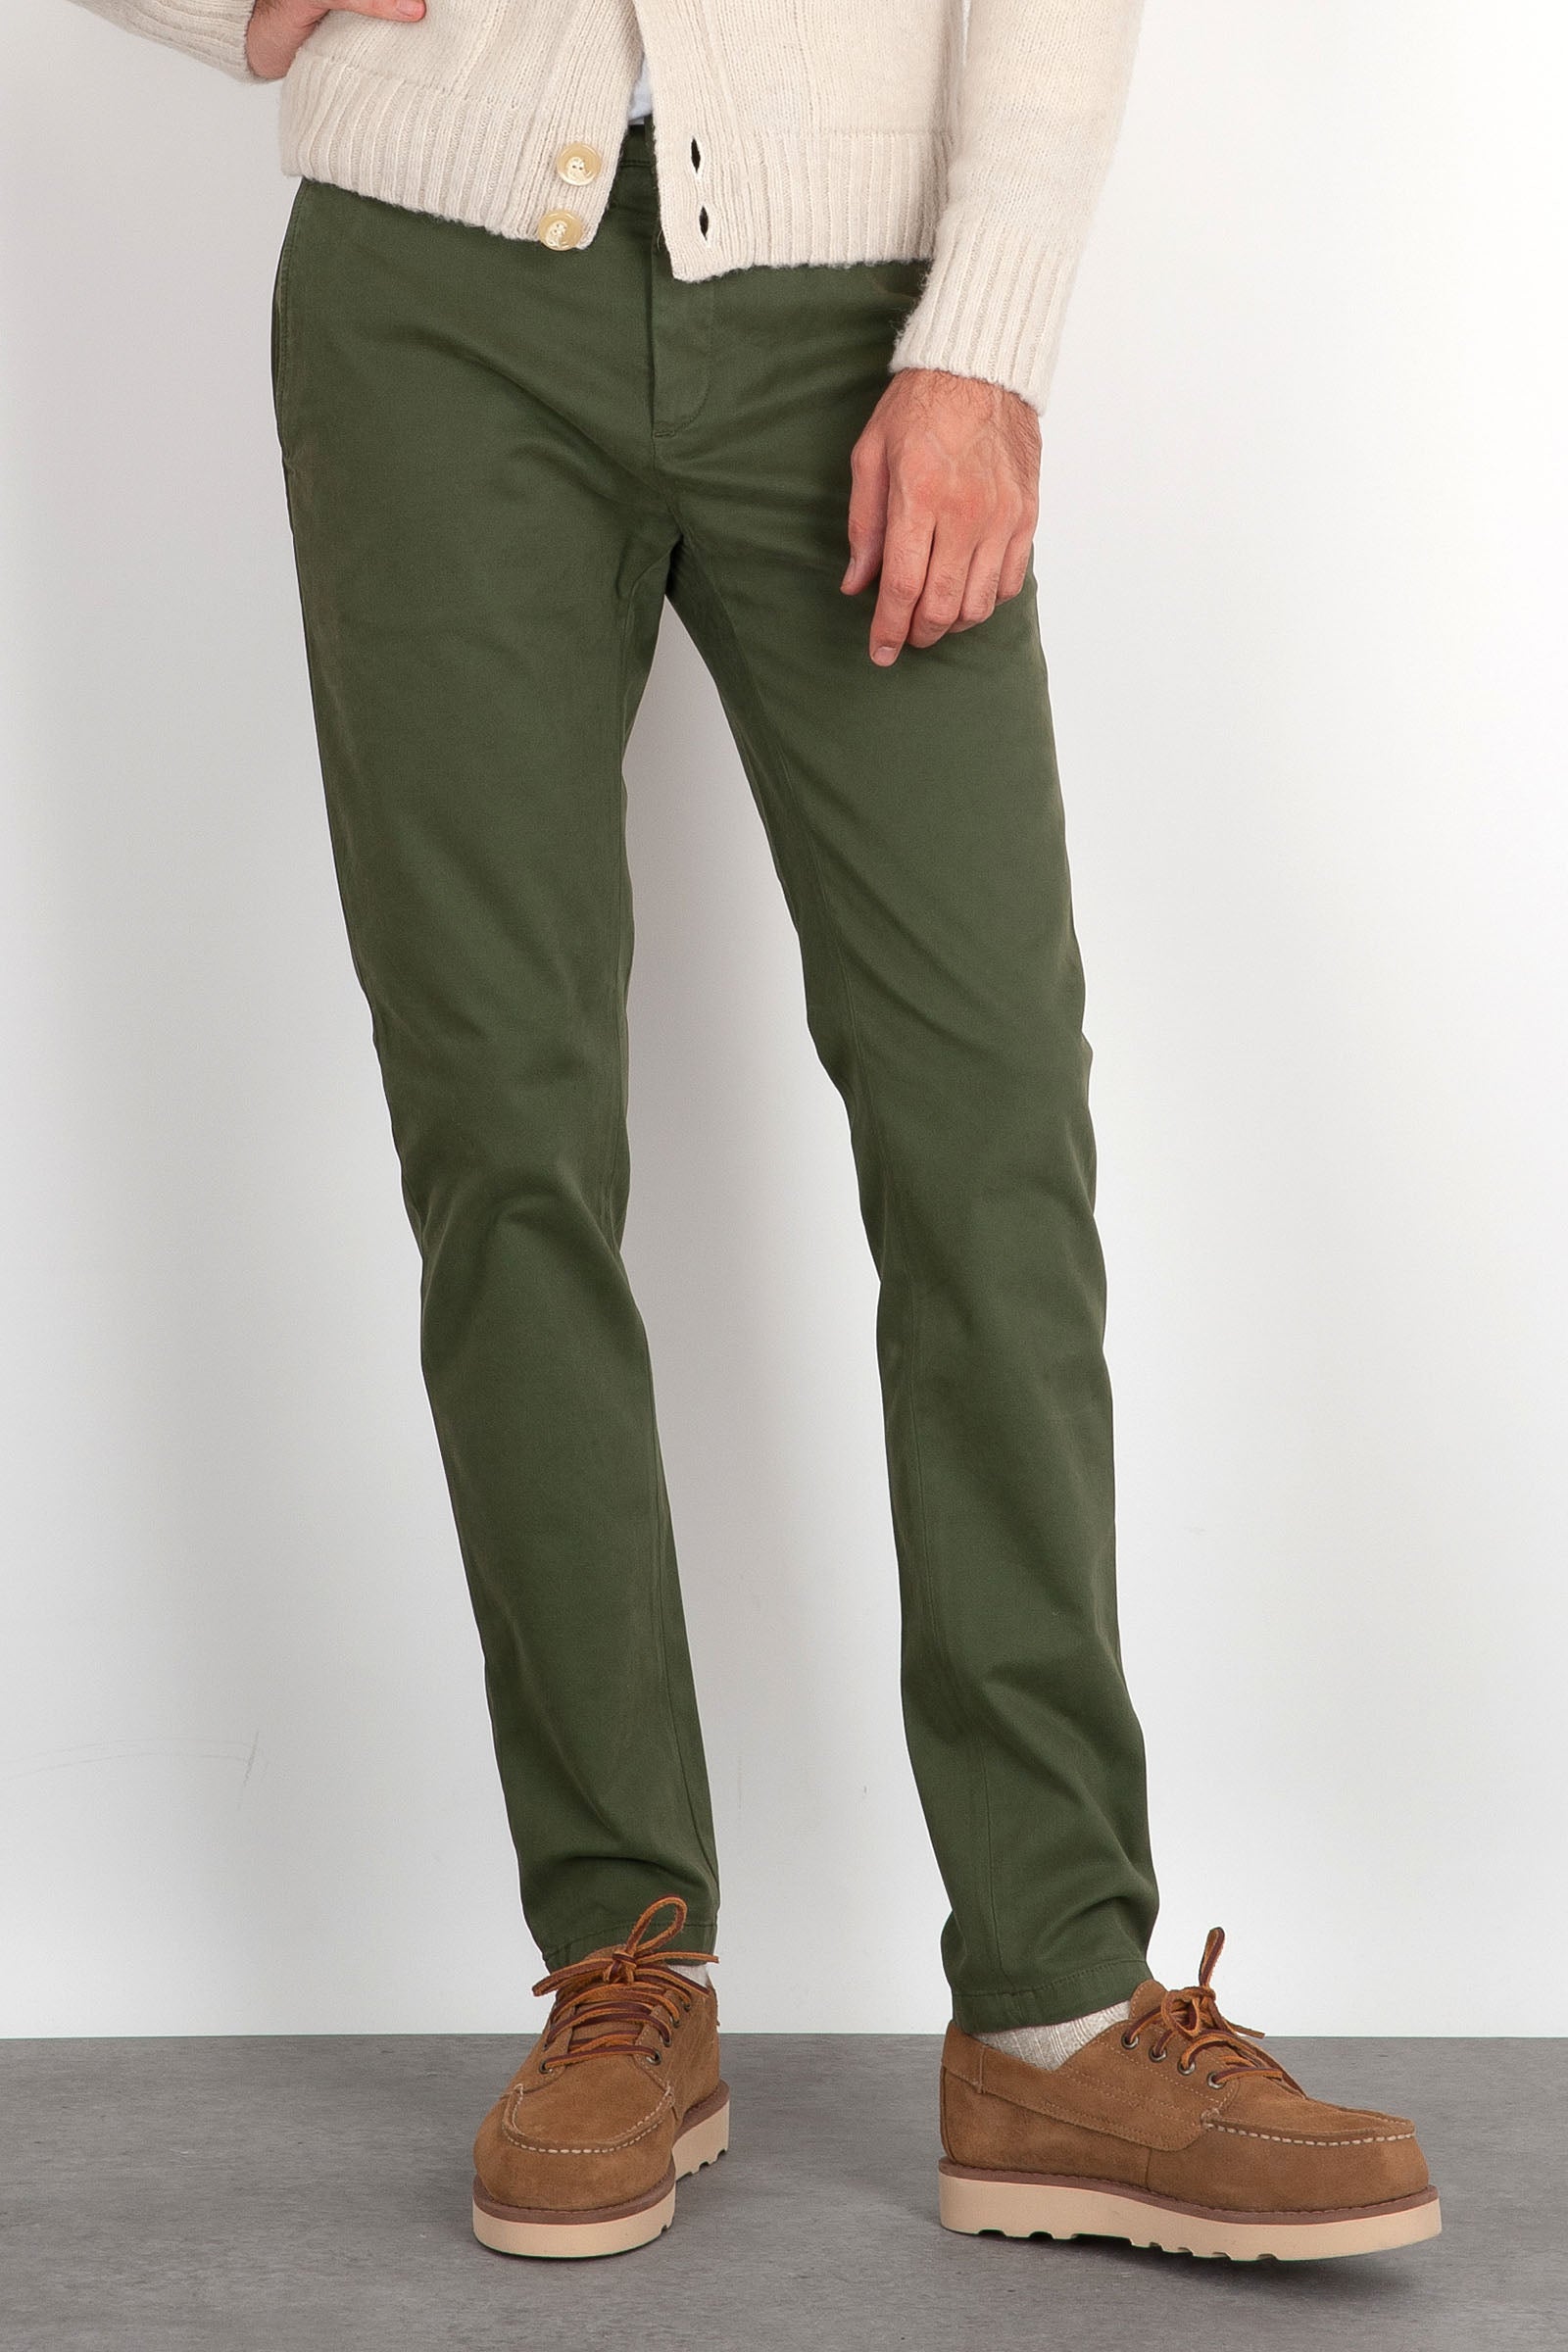 Department Five Mike Green Cotton Trousers - 1